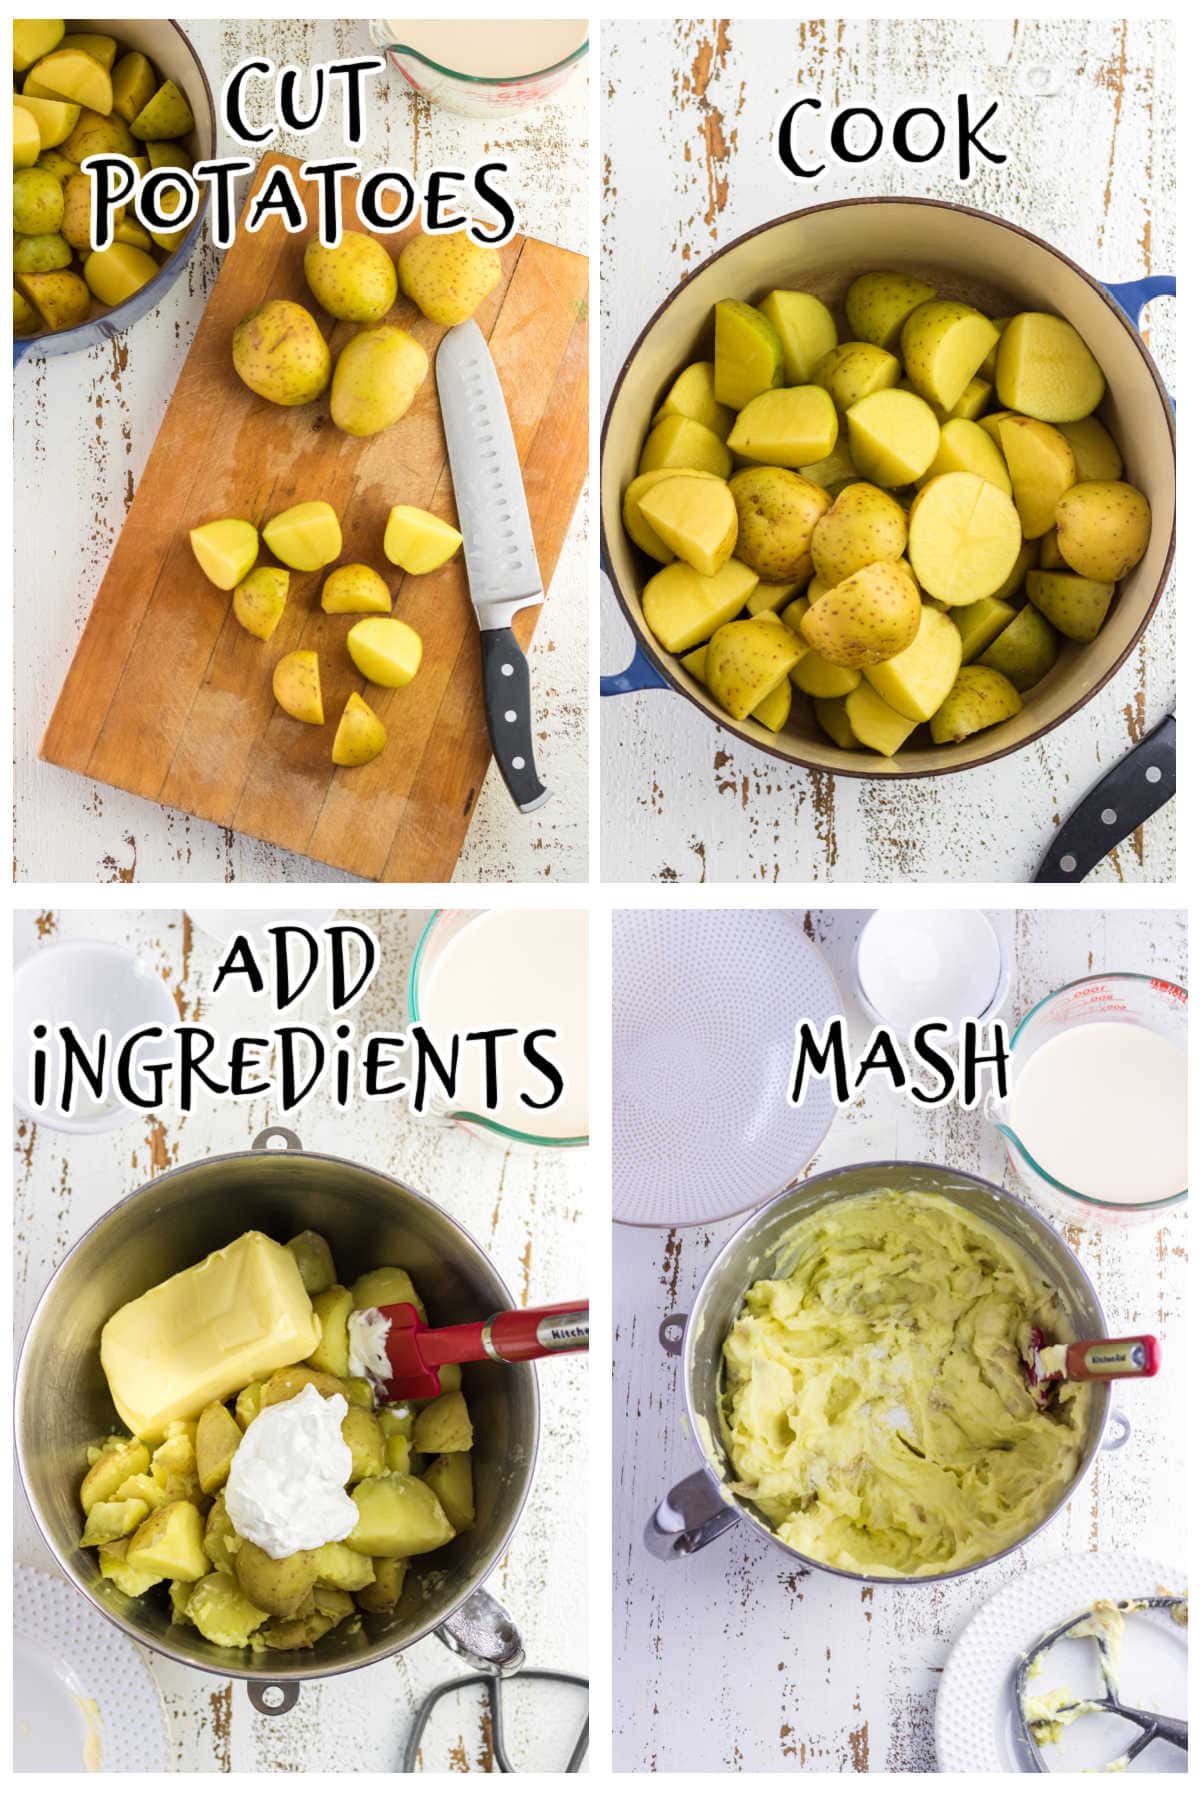 Step by step images showing how to make mashed potatoes.